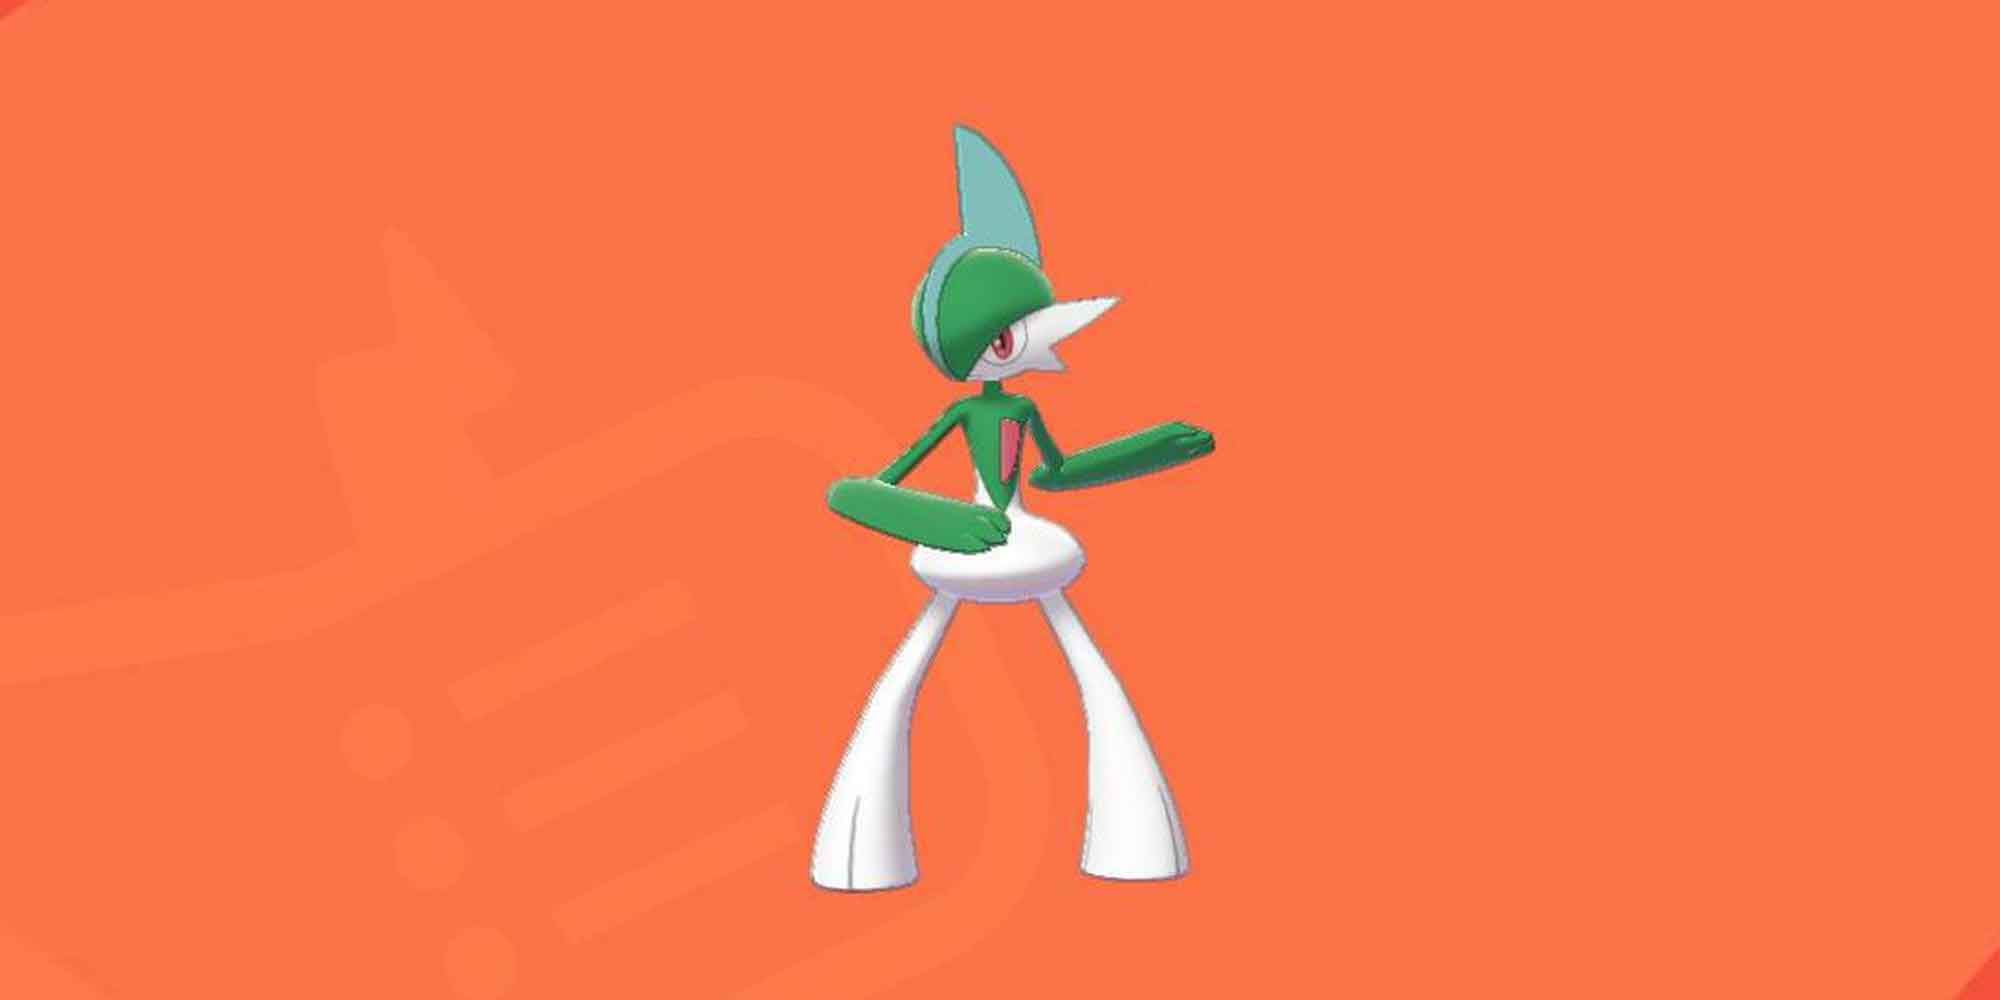 Gallade is a Grass/Fighting type Pokemon